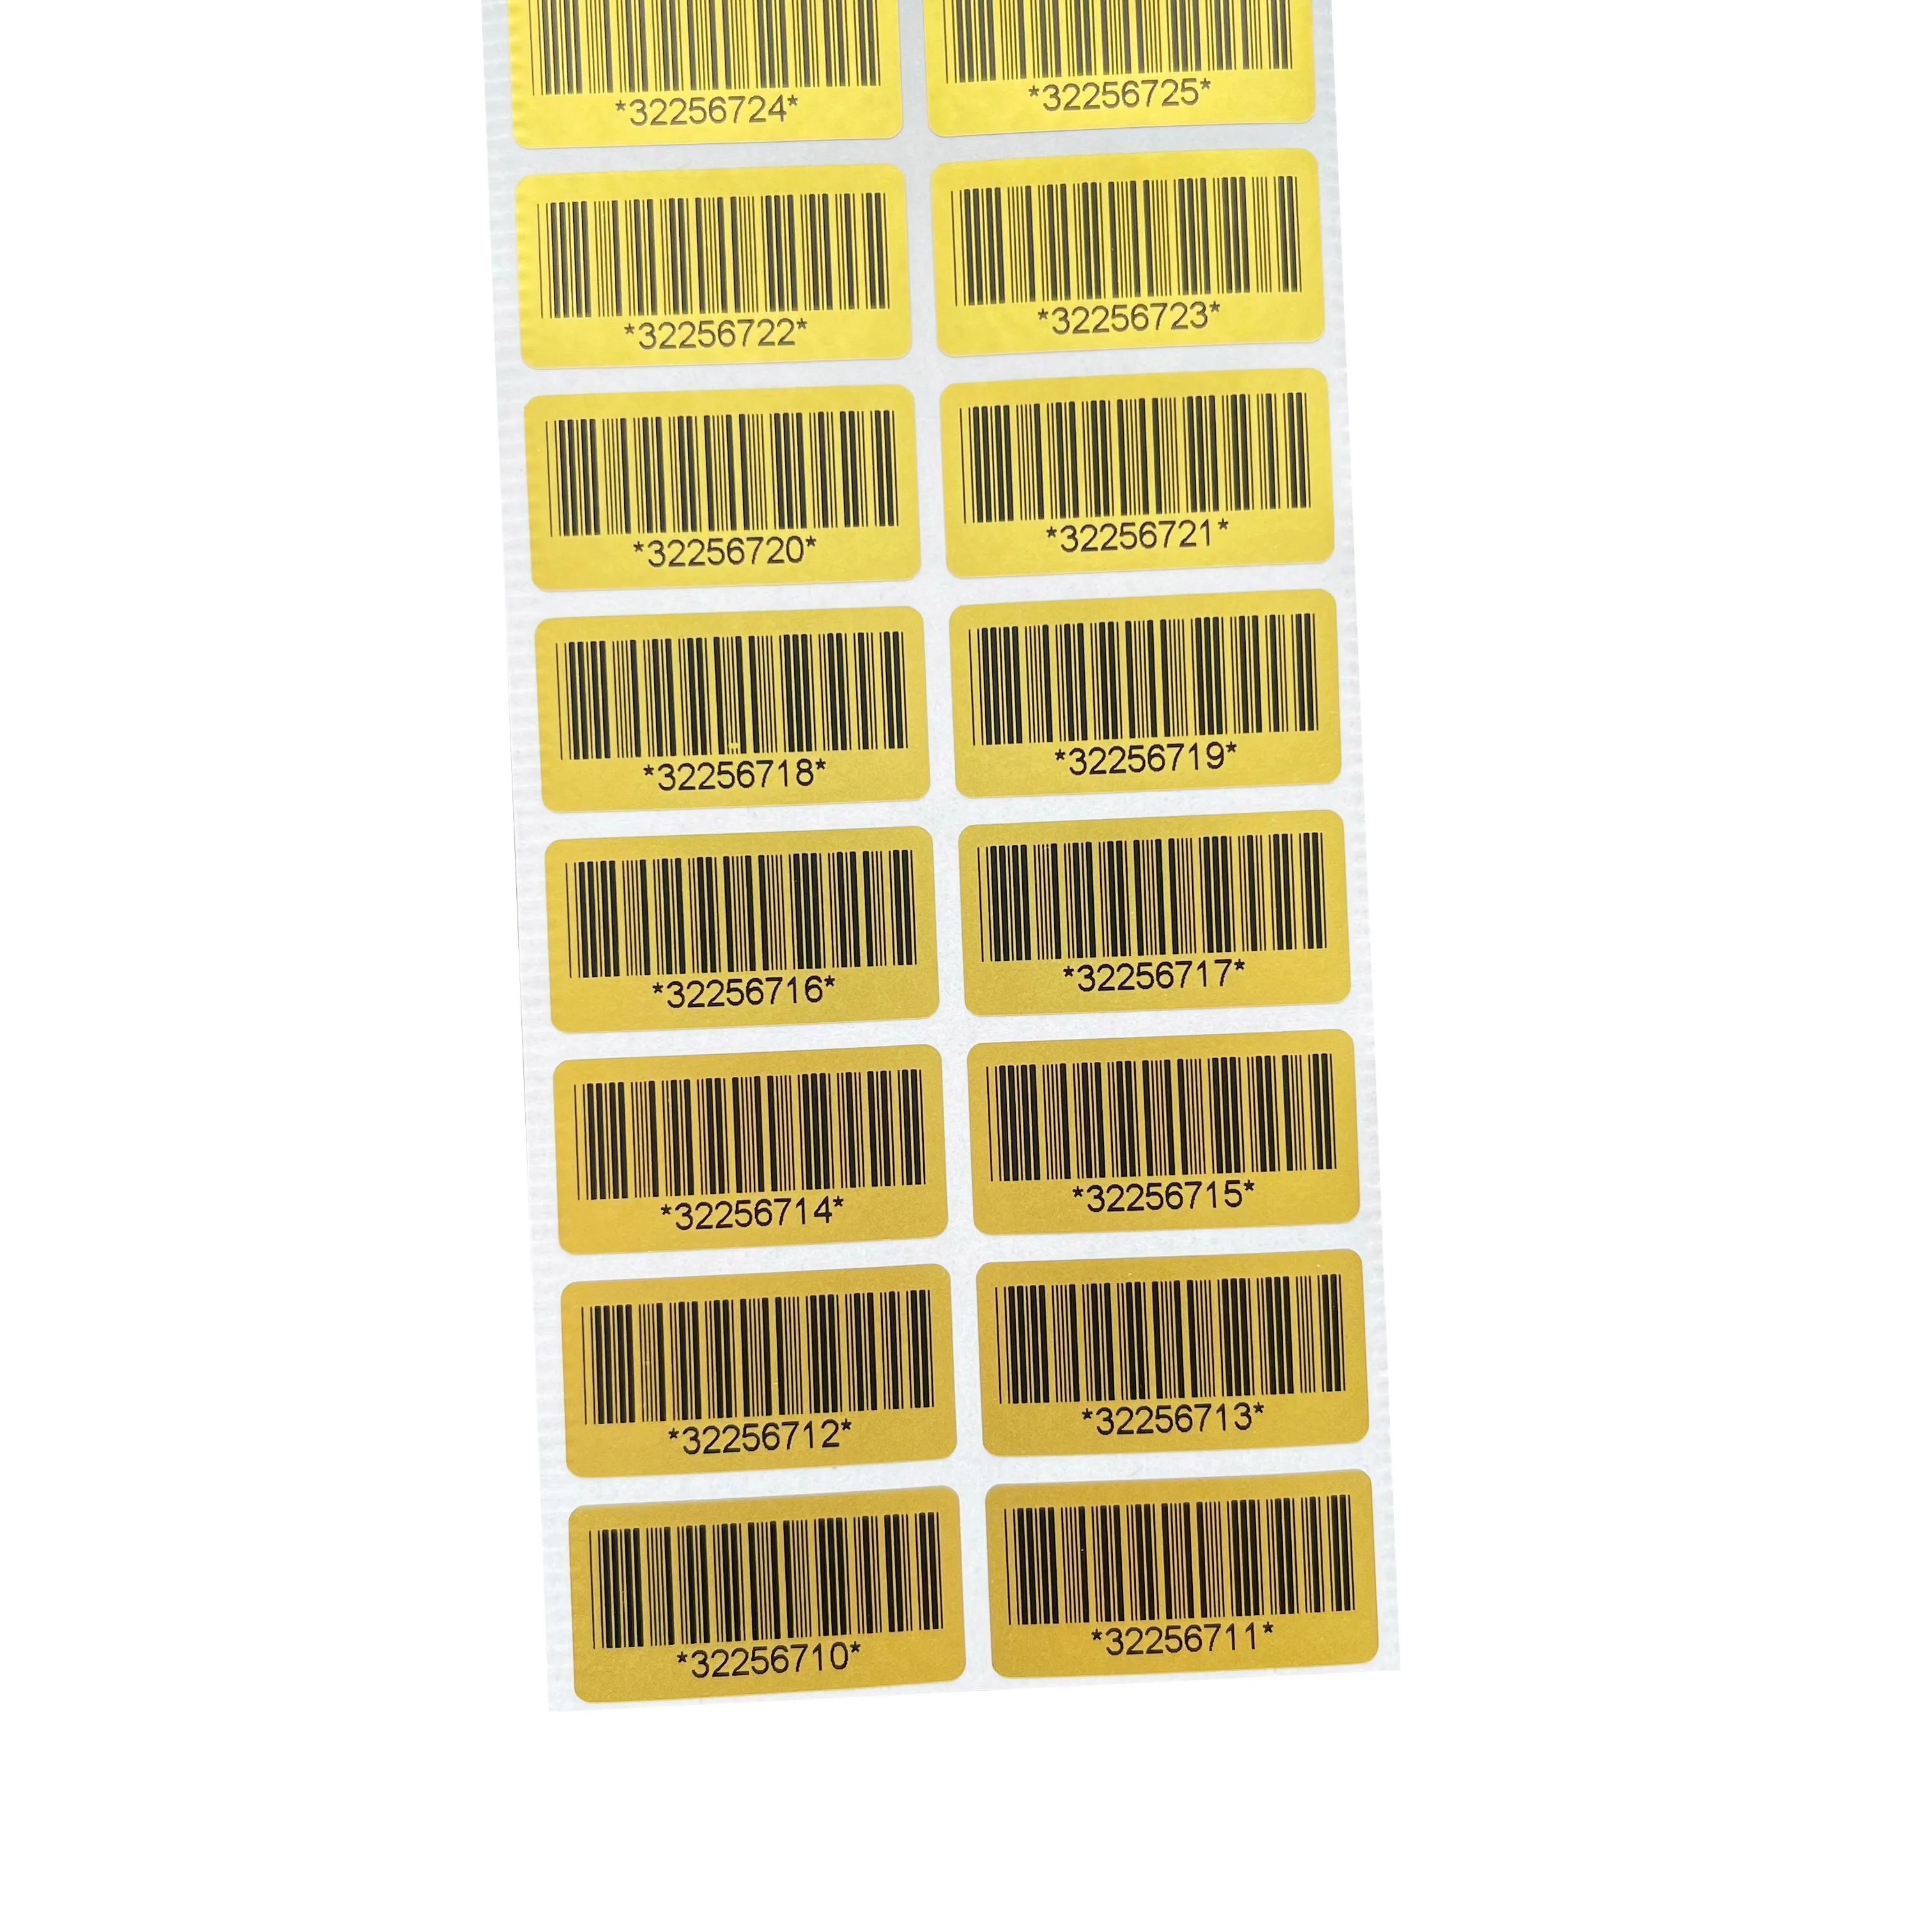 100pcs golden Warranty Protection Sticker (30mm x15mm )Security Seal Tamper Proof Warranty Void Label Stickers